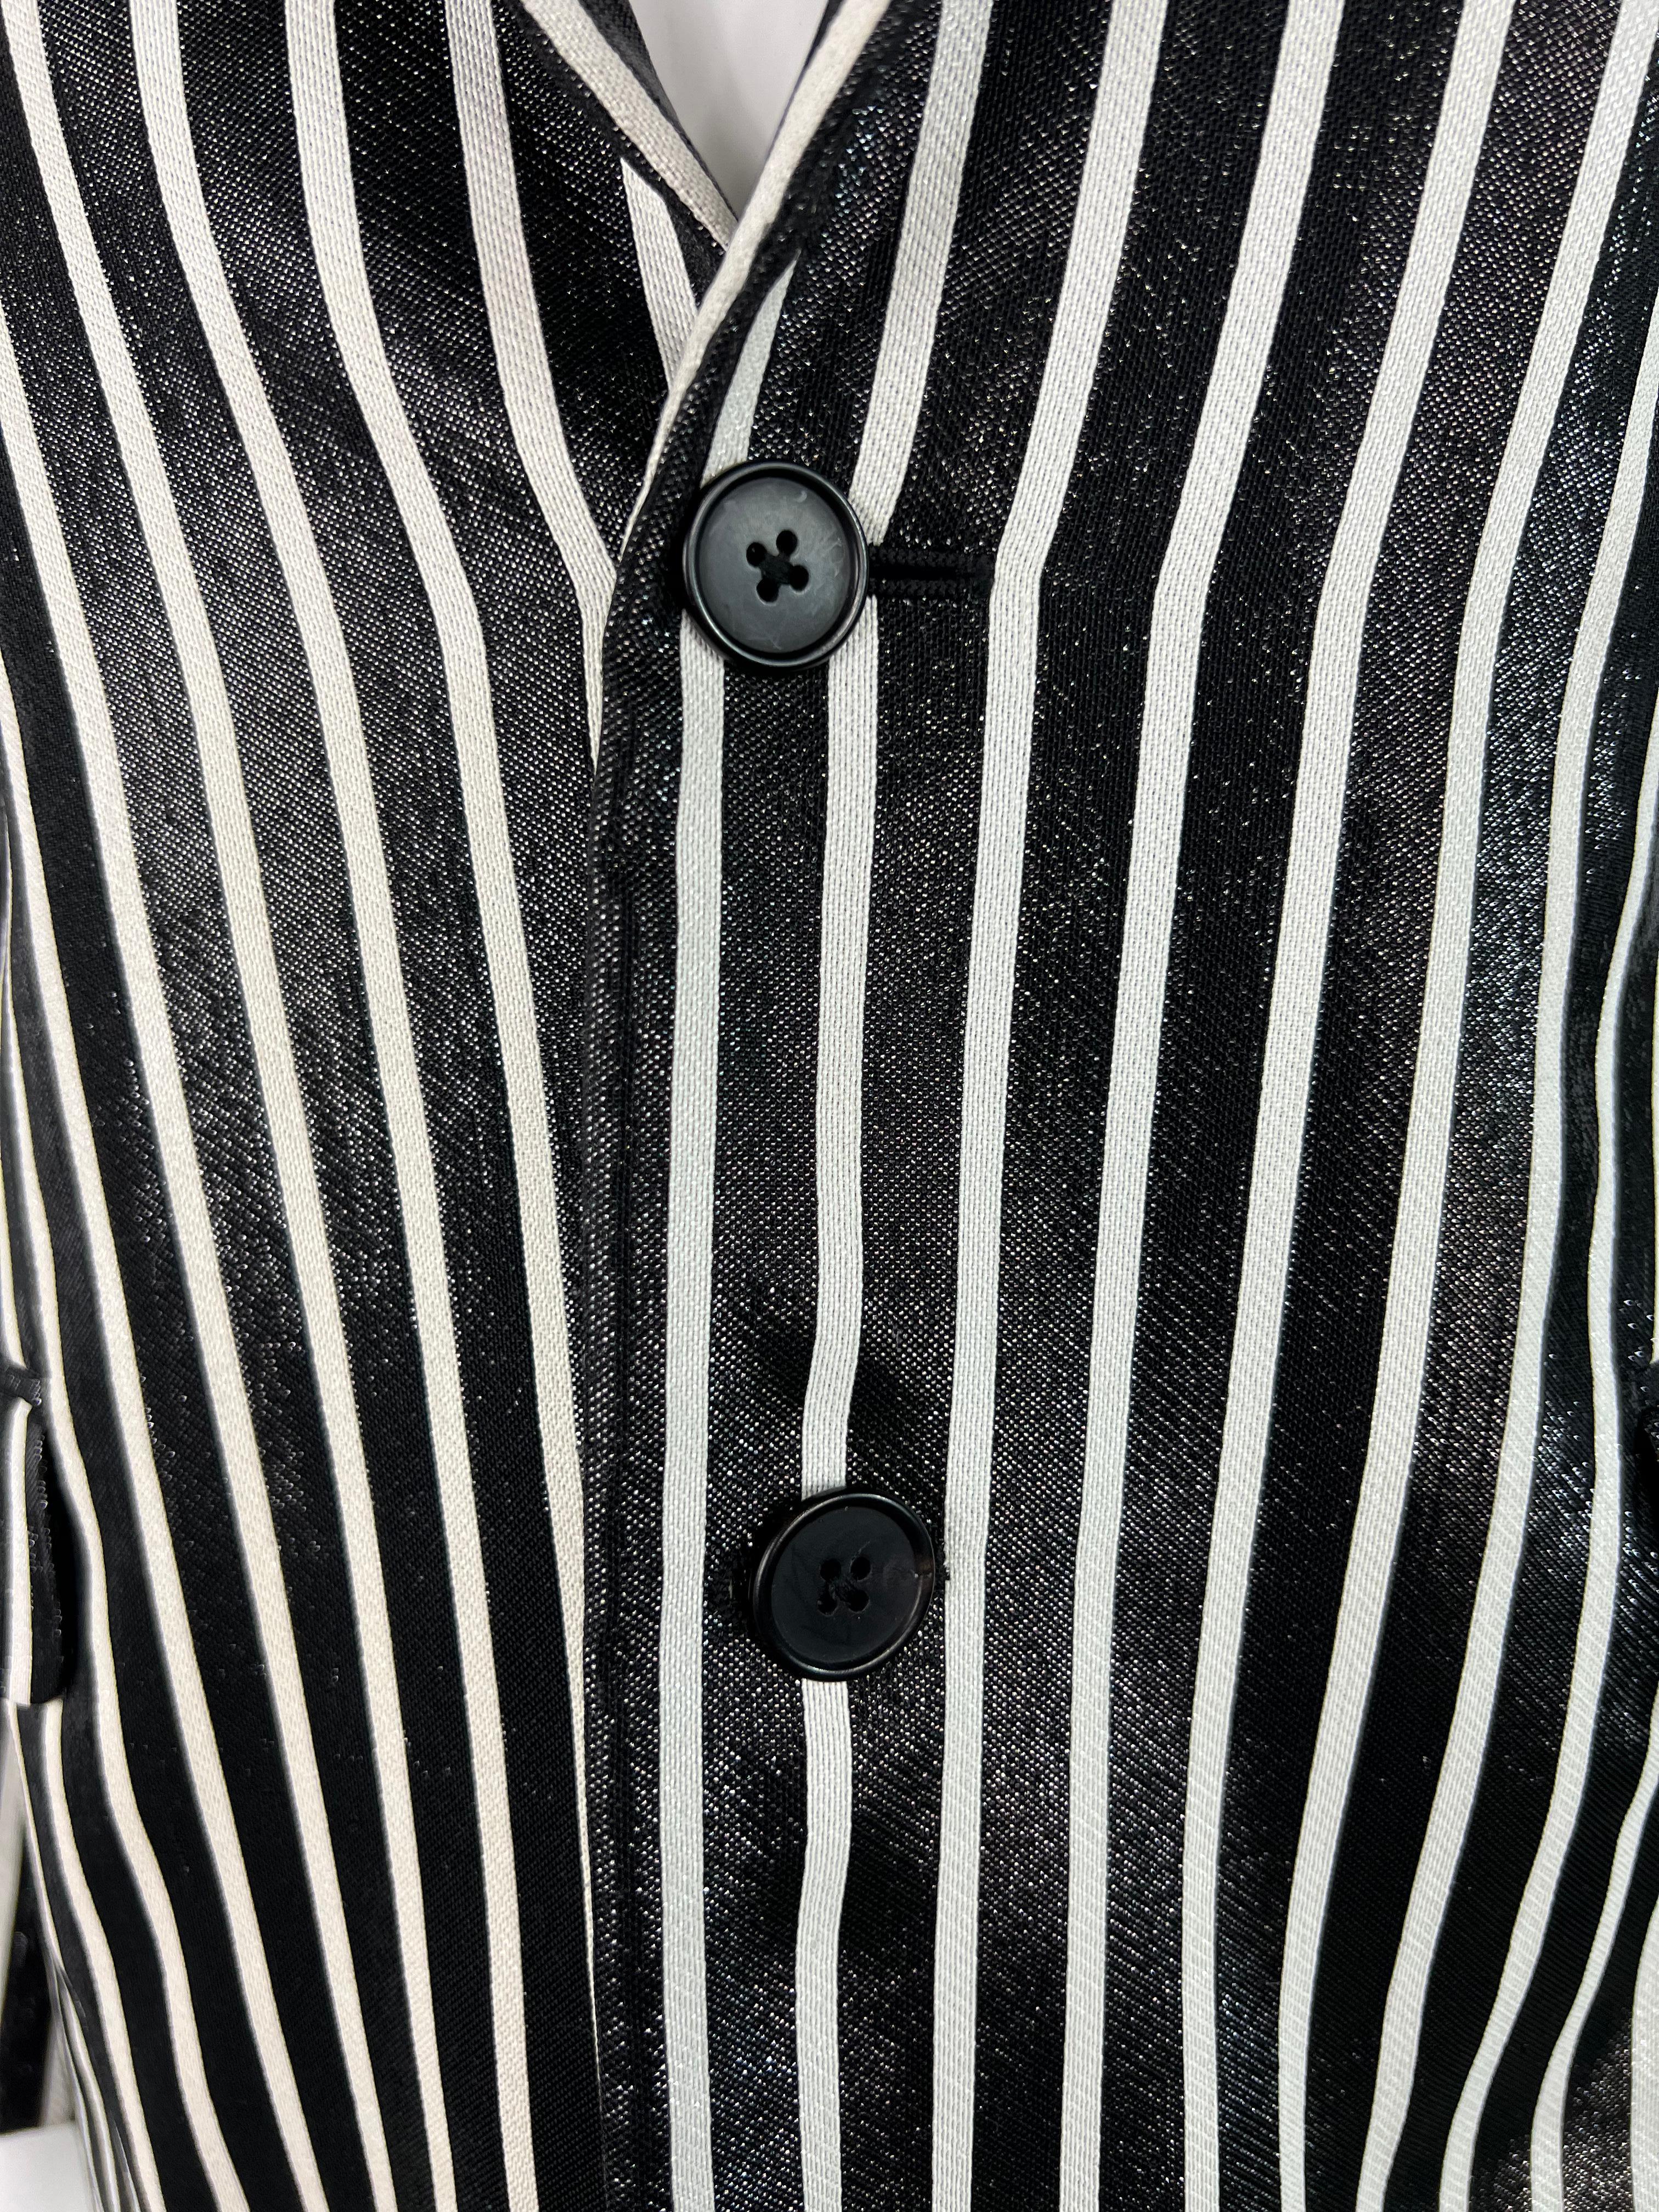 Product details:

The blazer features black and white striped pattern with front button closure and pocket on each side.